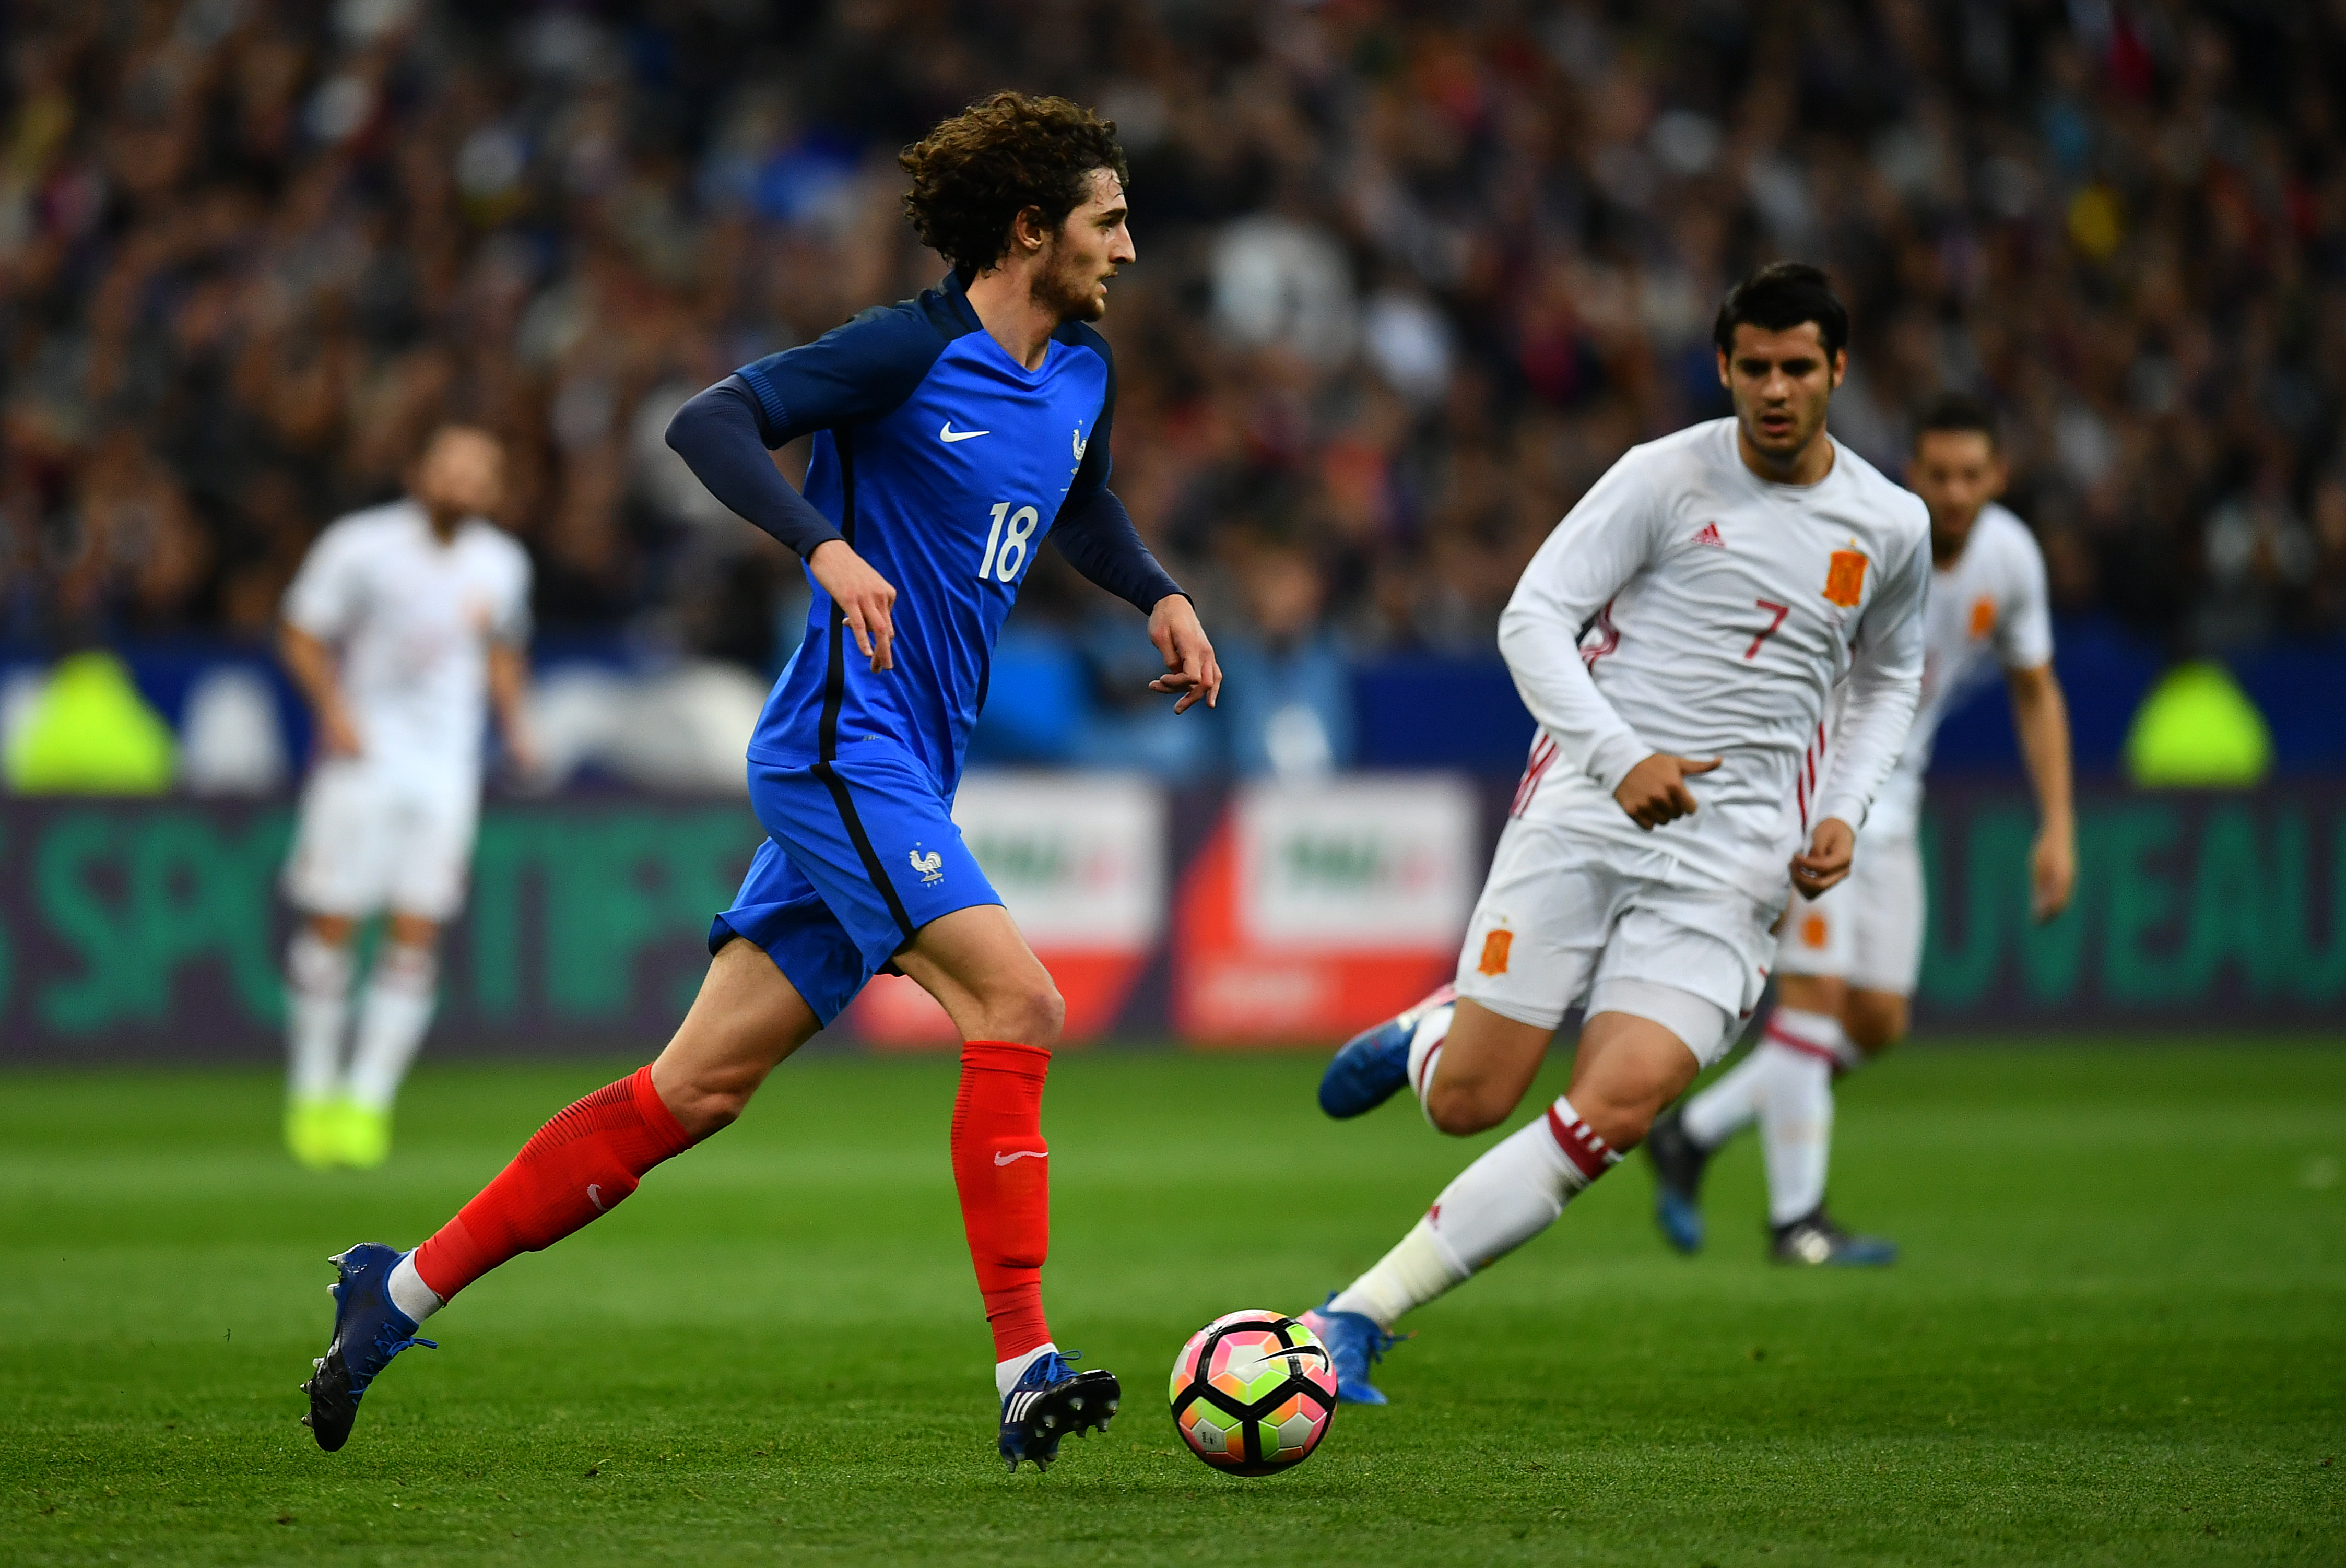 PARIS, FRANCE - MARCH 28:  Adrien Rabiot of France looks for space during the International Friendly match between France and Spain at the Stade de France on March 28, 2017 in Paris, France. (Photo by Dan Mullan/Getty Images)